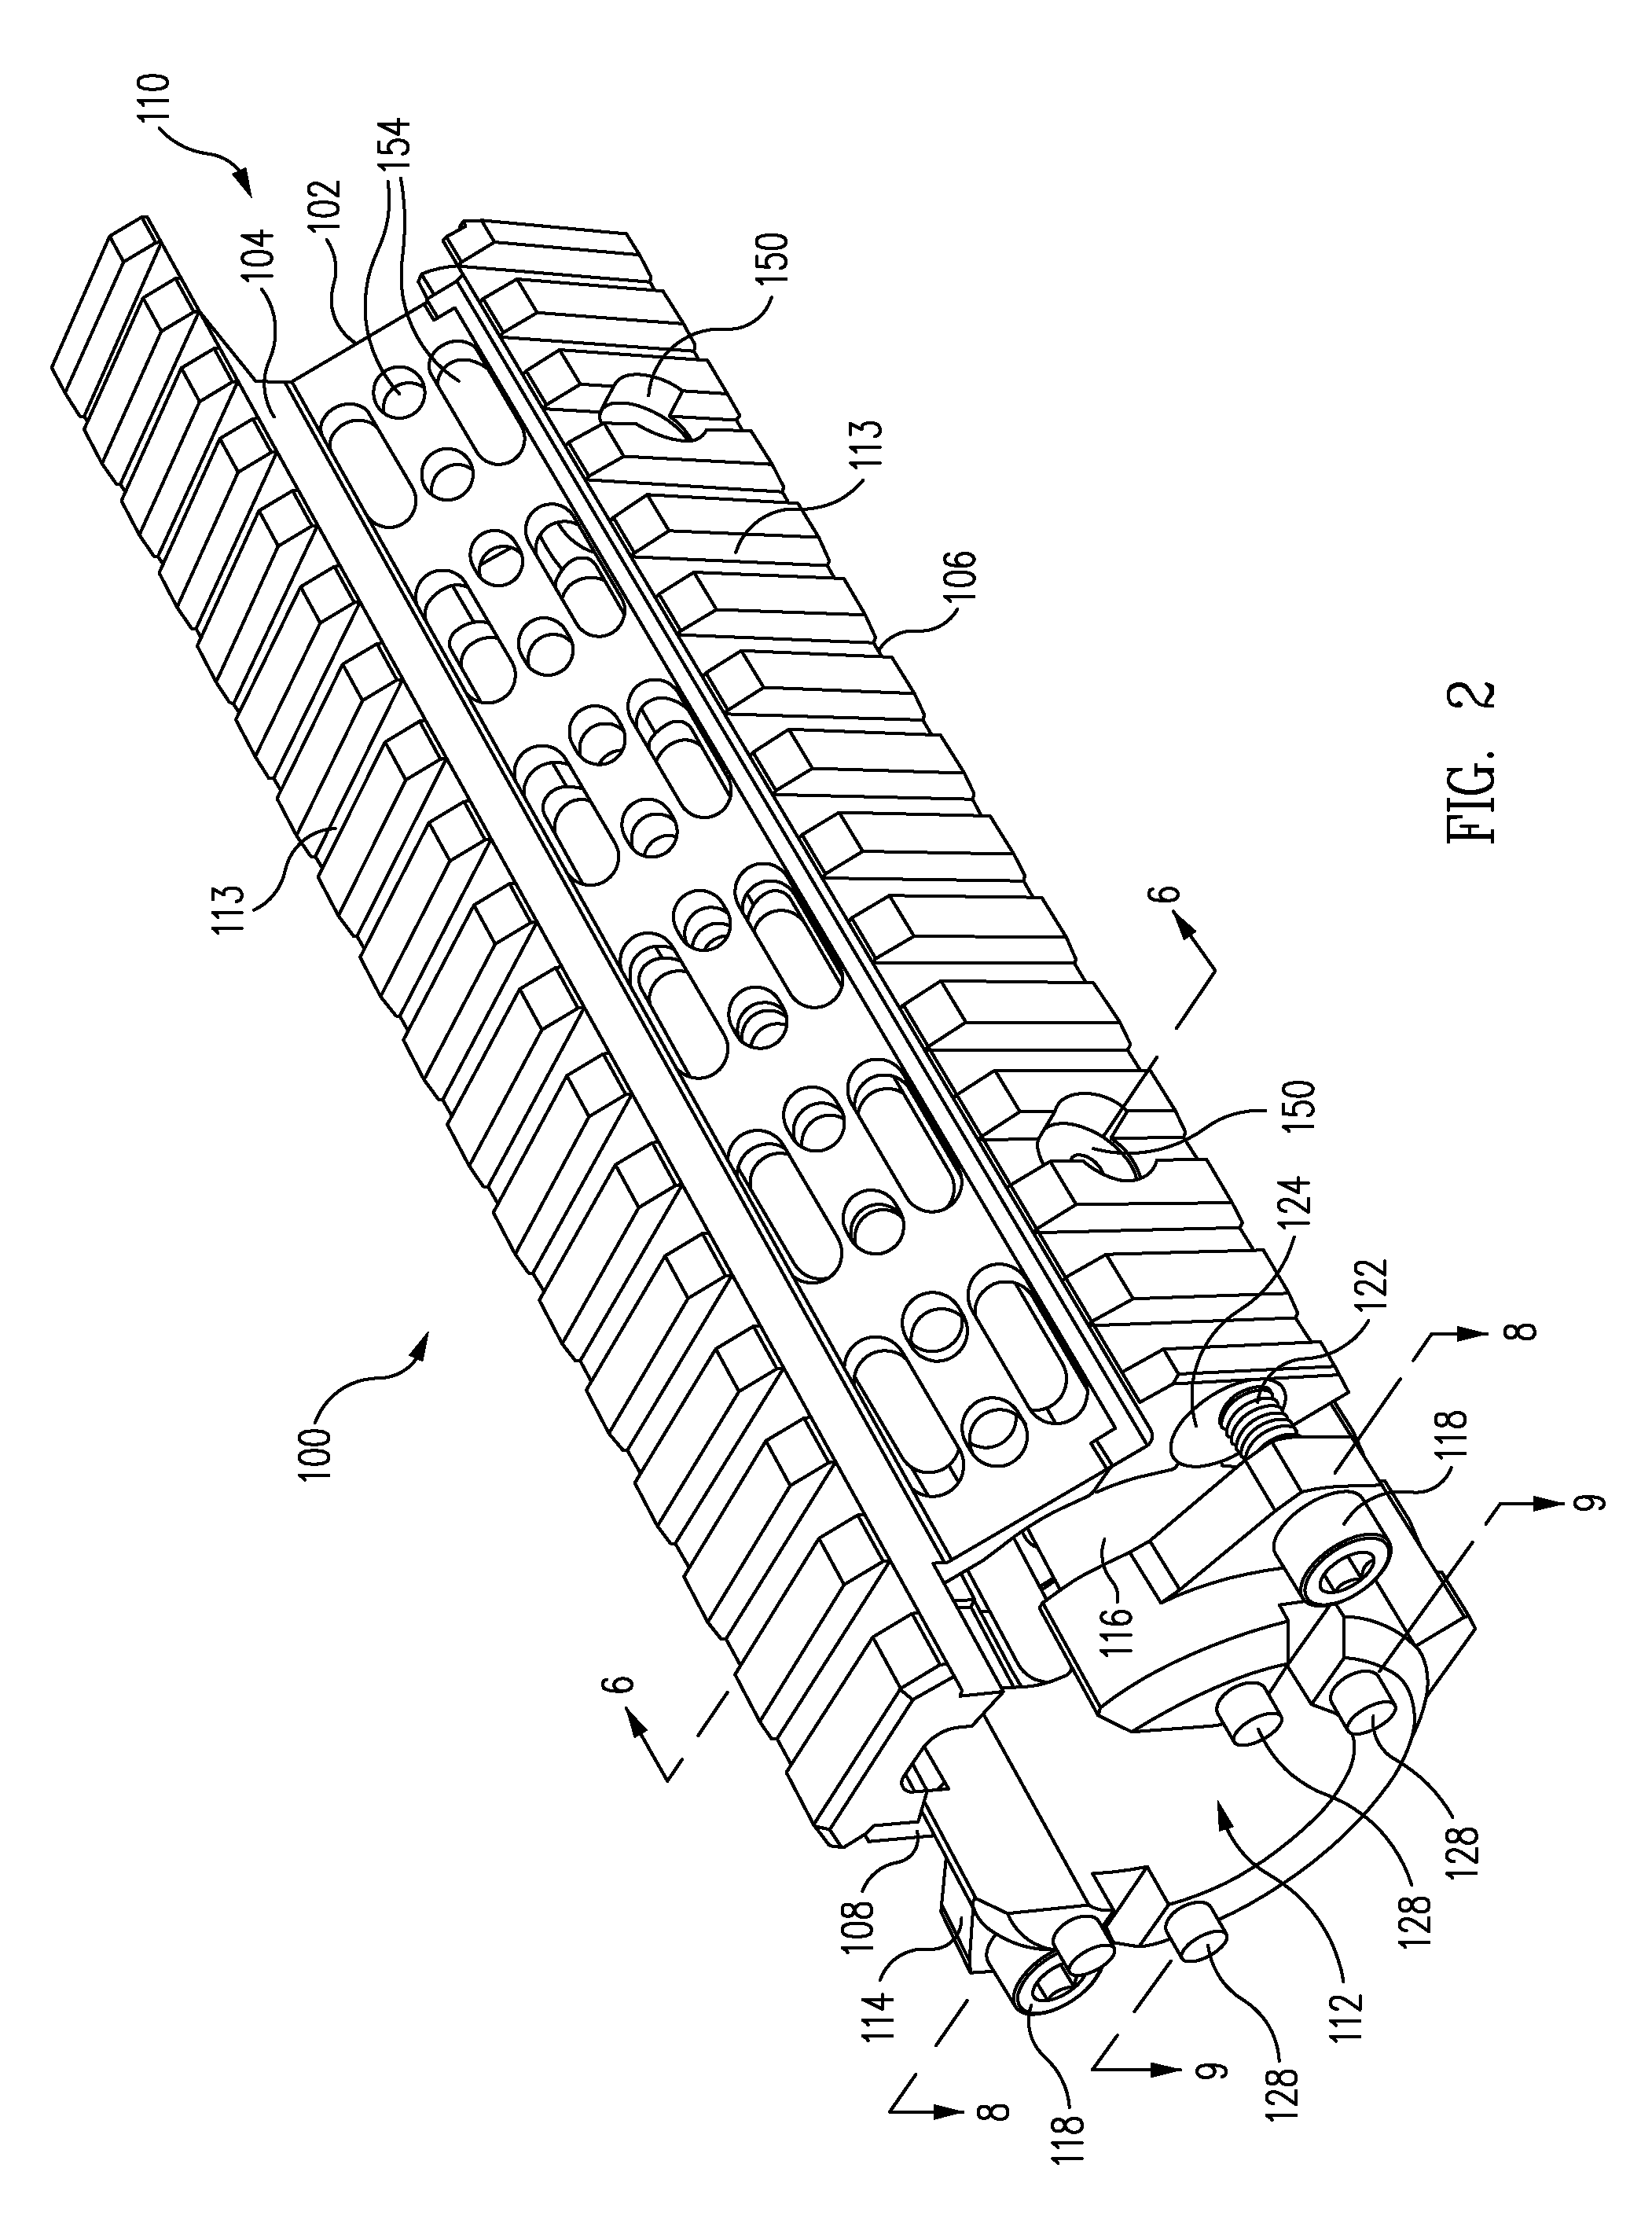 Accessory mounting hand guard for firearm